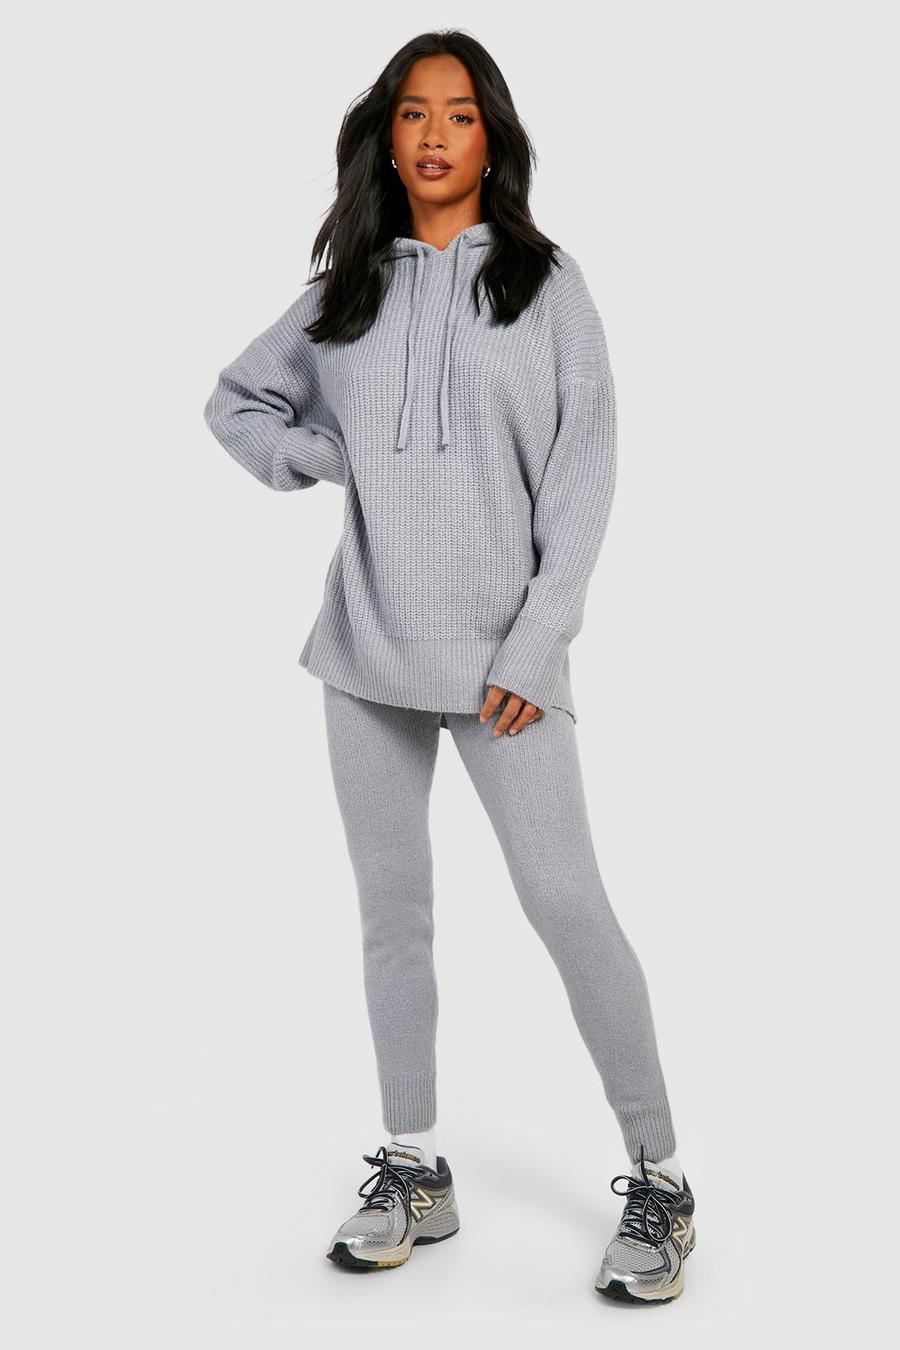 Grey Petite Soft Knit Hoodie Co-ord 